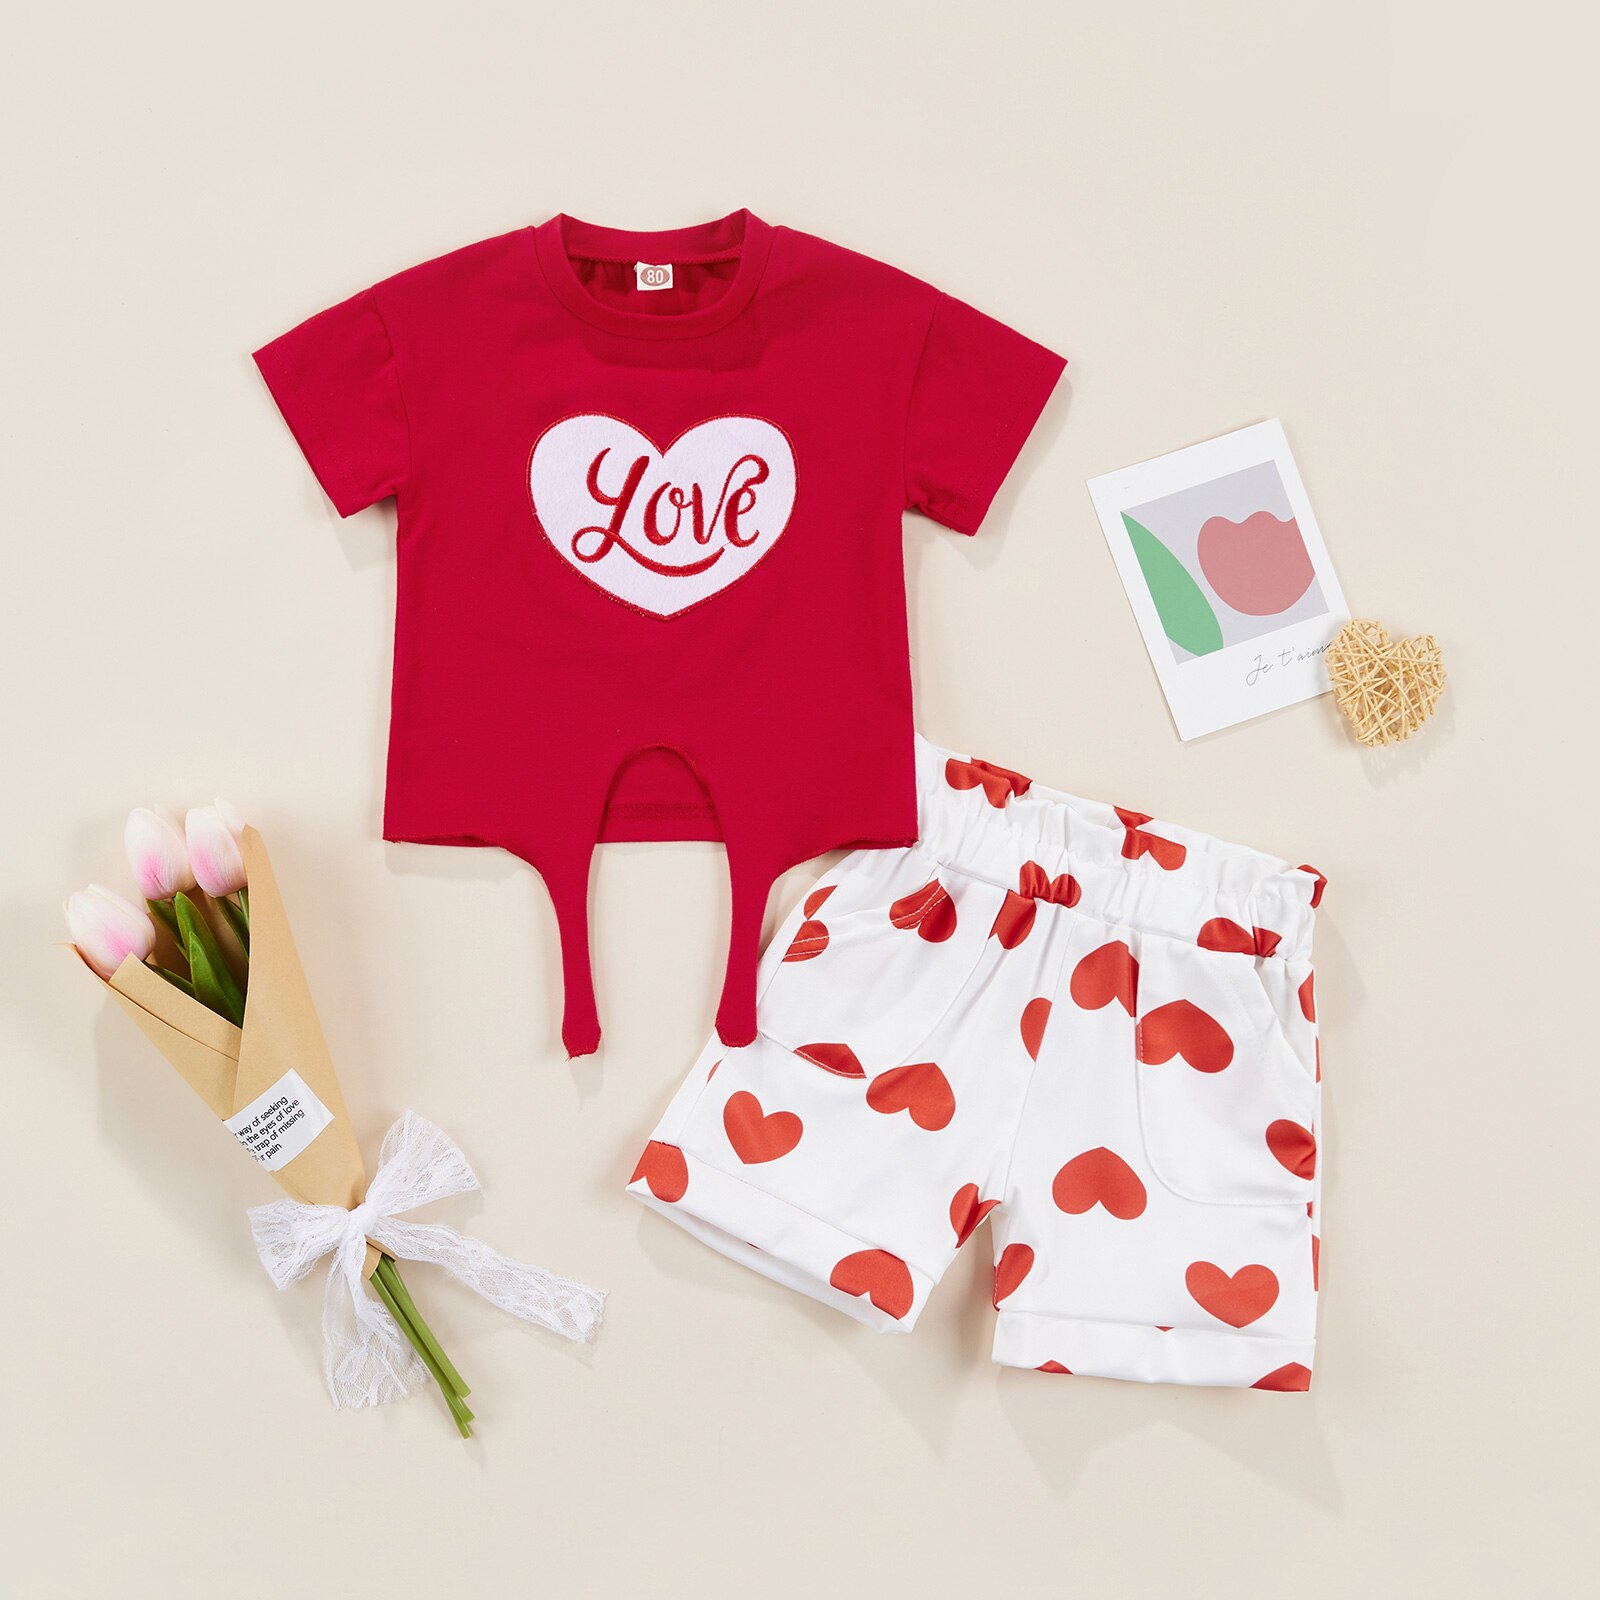 FOCUSNORM-0-4Y-Valentines-Days-Baby-Girls-Clothes-Sets-Heart-Letter-Embroidered-Short-Sleeve-Tops-Shorts-1